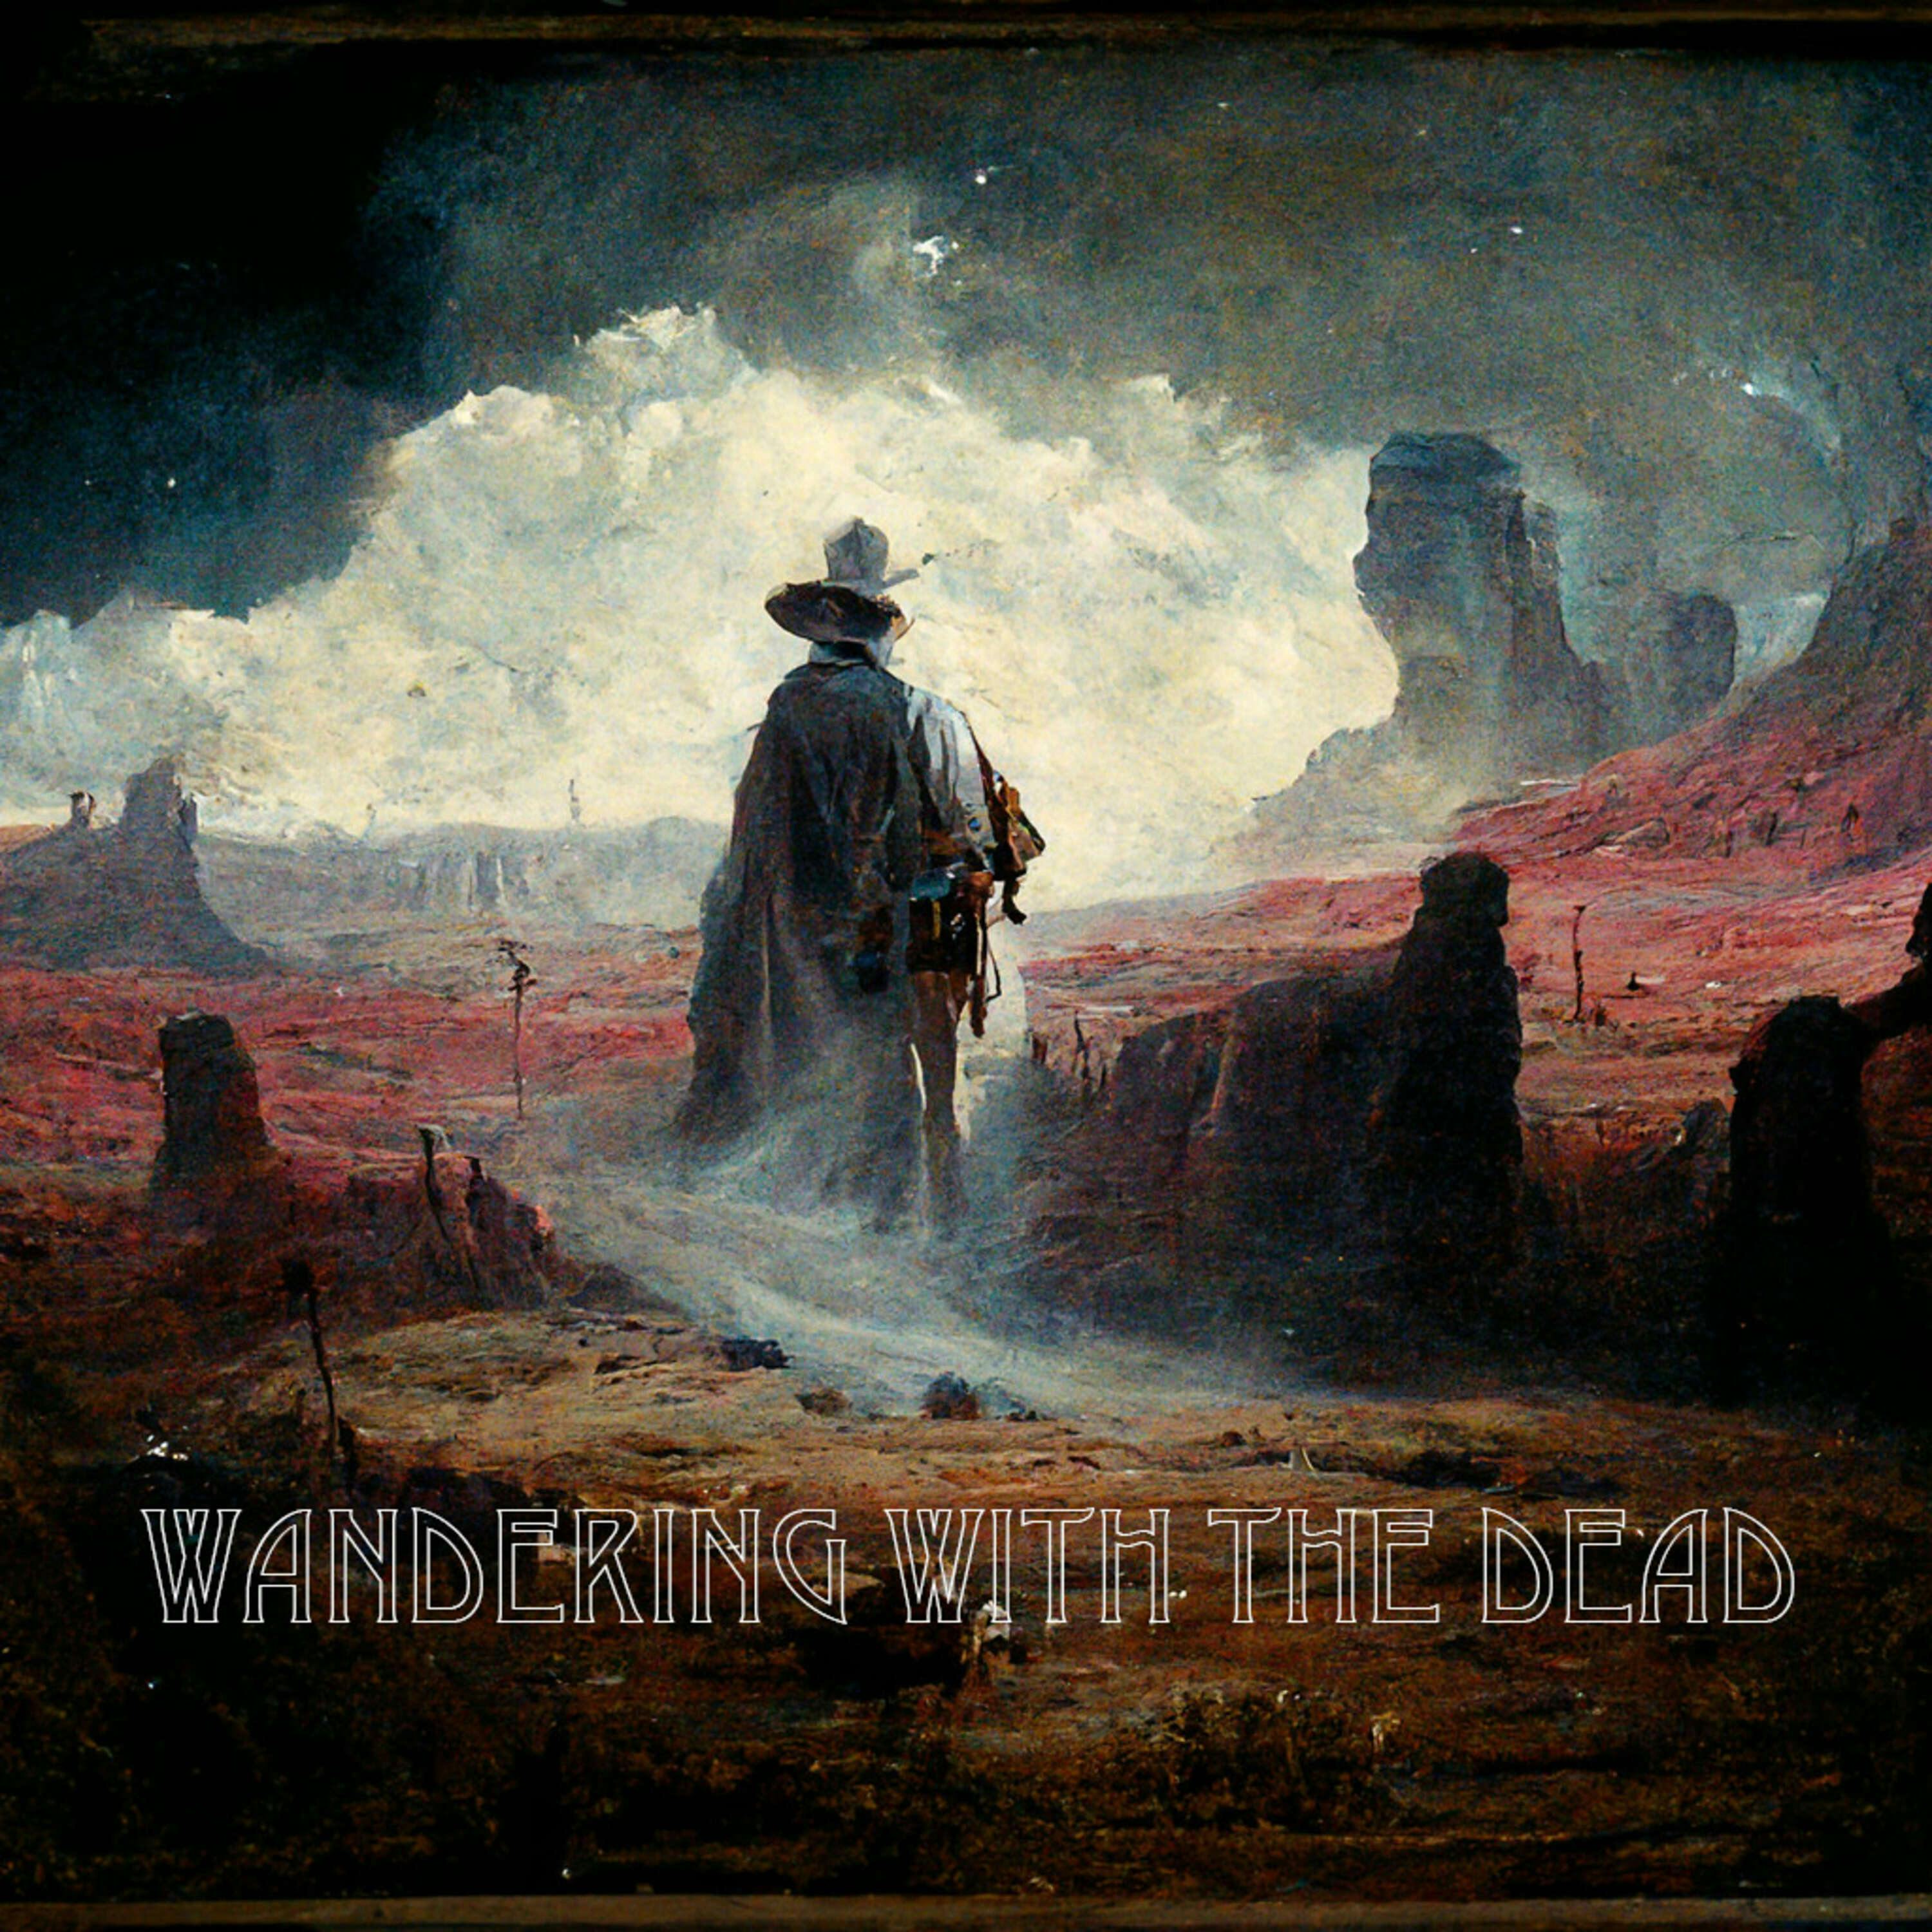 Wandering with the Dead